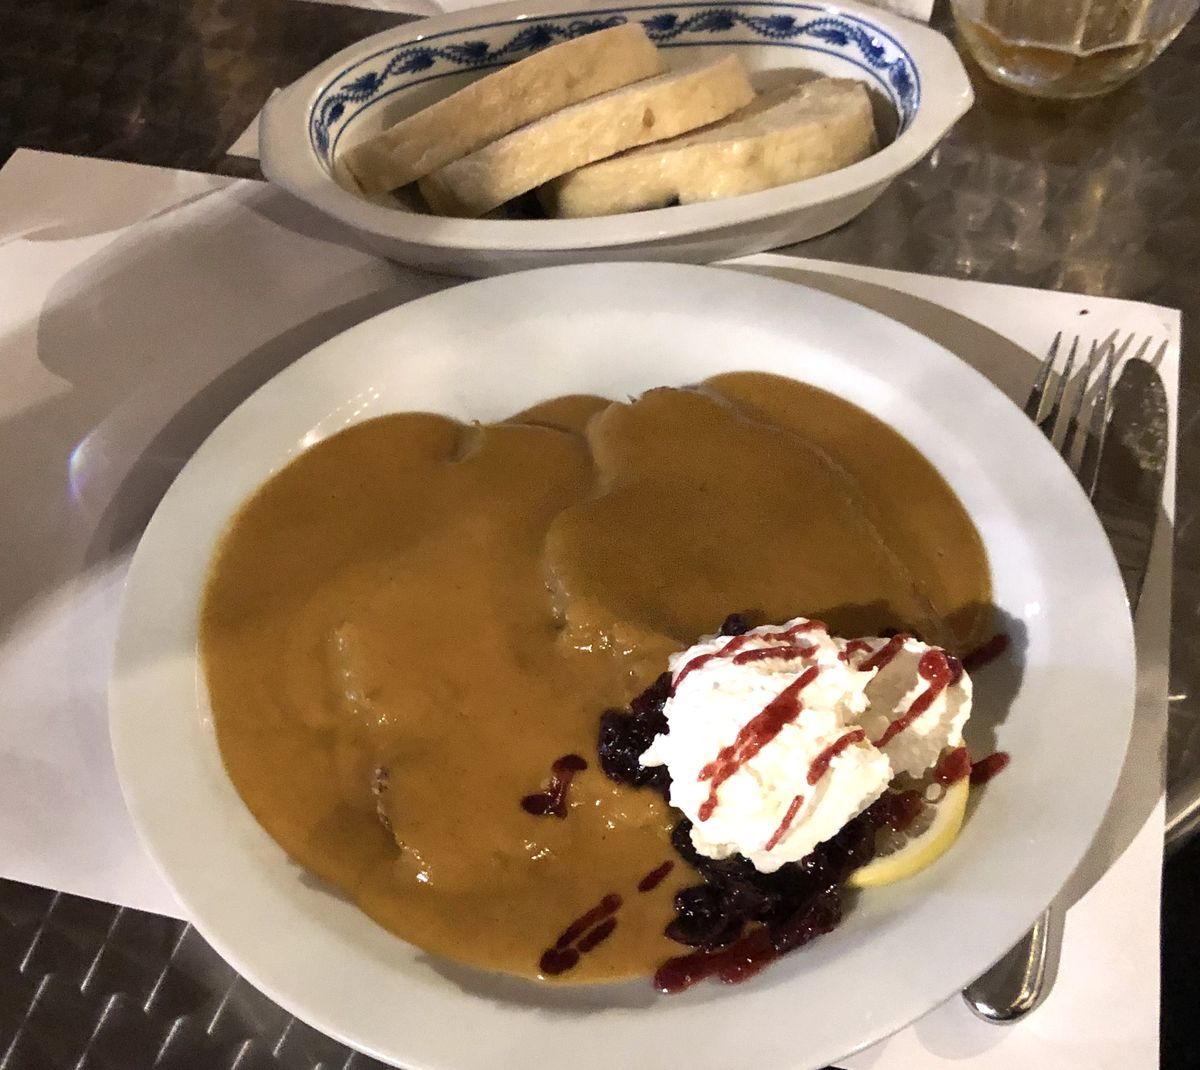 A plate of the Czech dish svickova, which has a brownish sauce and comes with a side of whipped cream and reddish berry-like jam and a slice of lemon